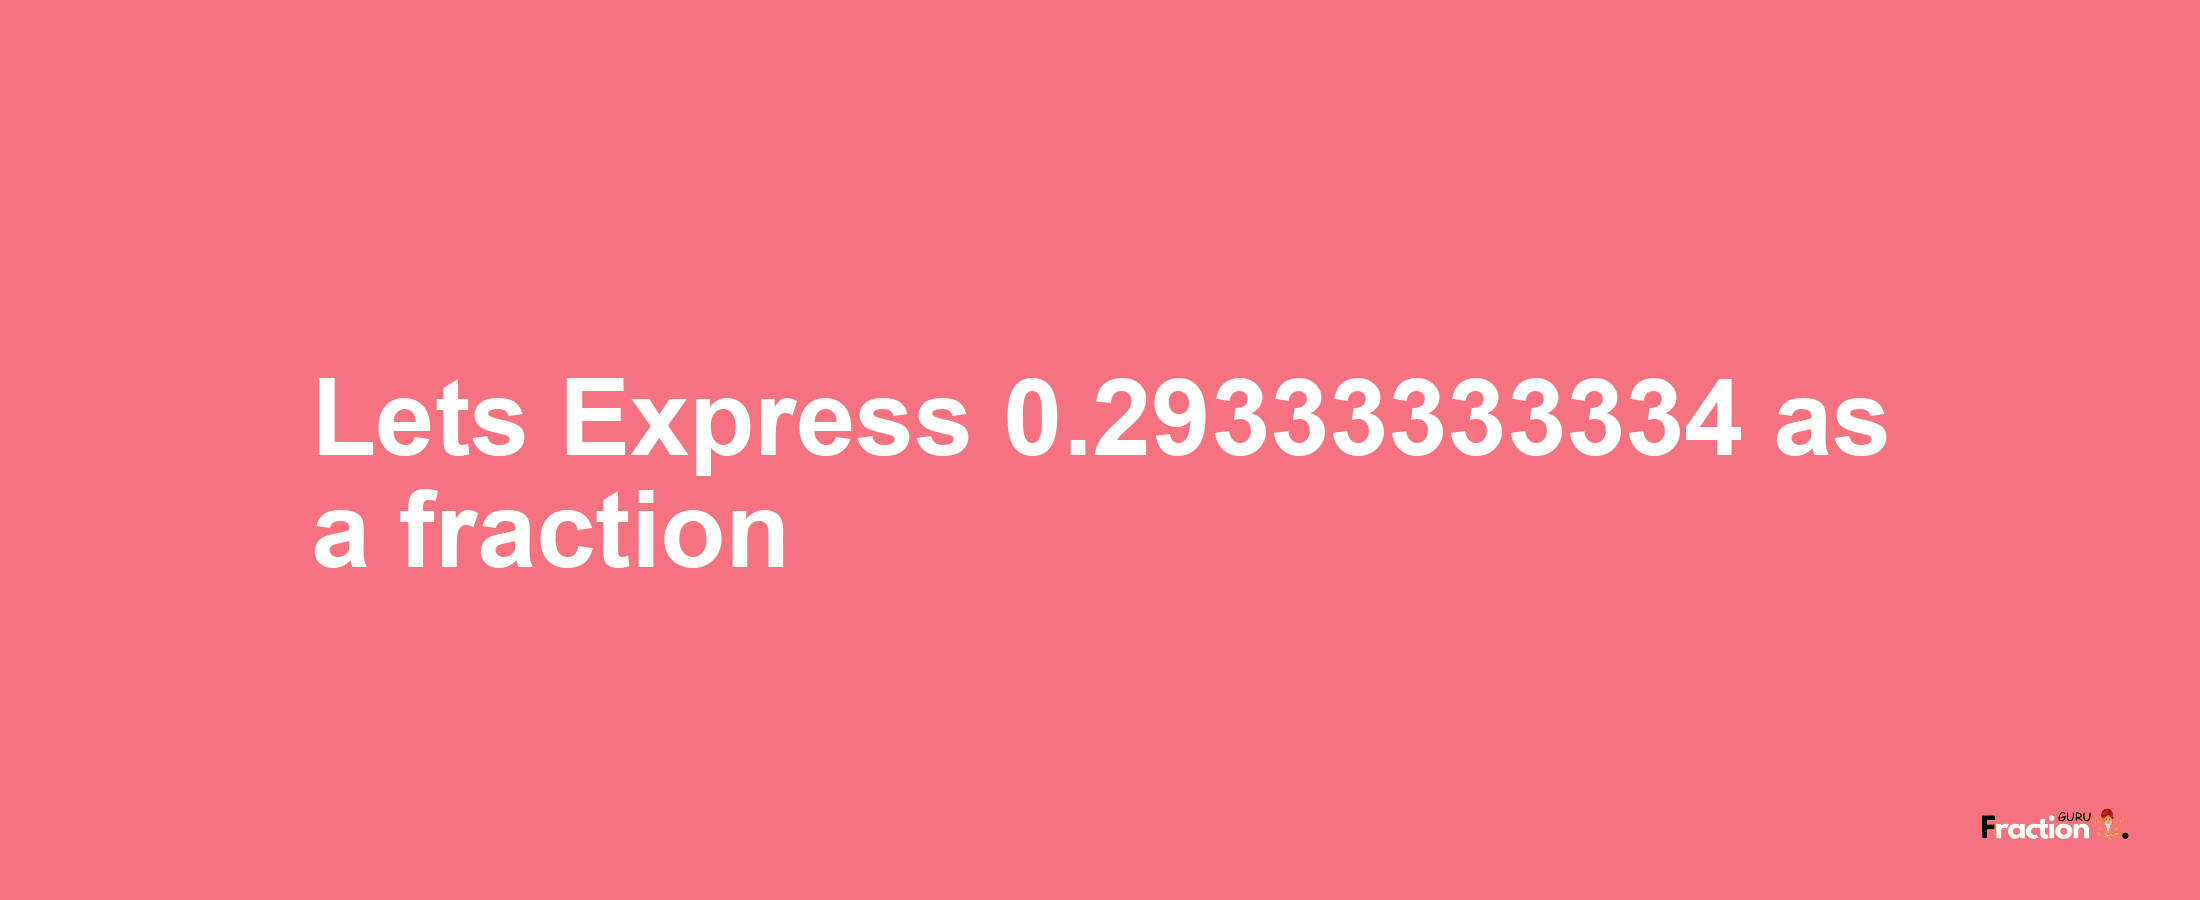 Lets Express 0.29333333334 as afraction